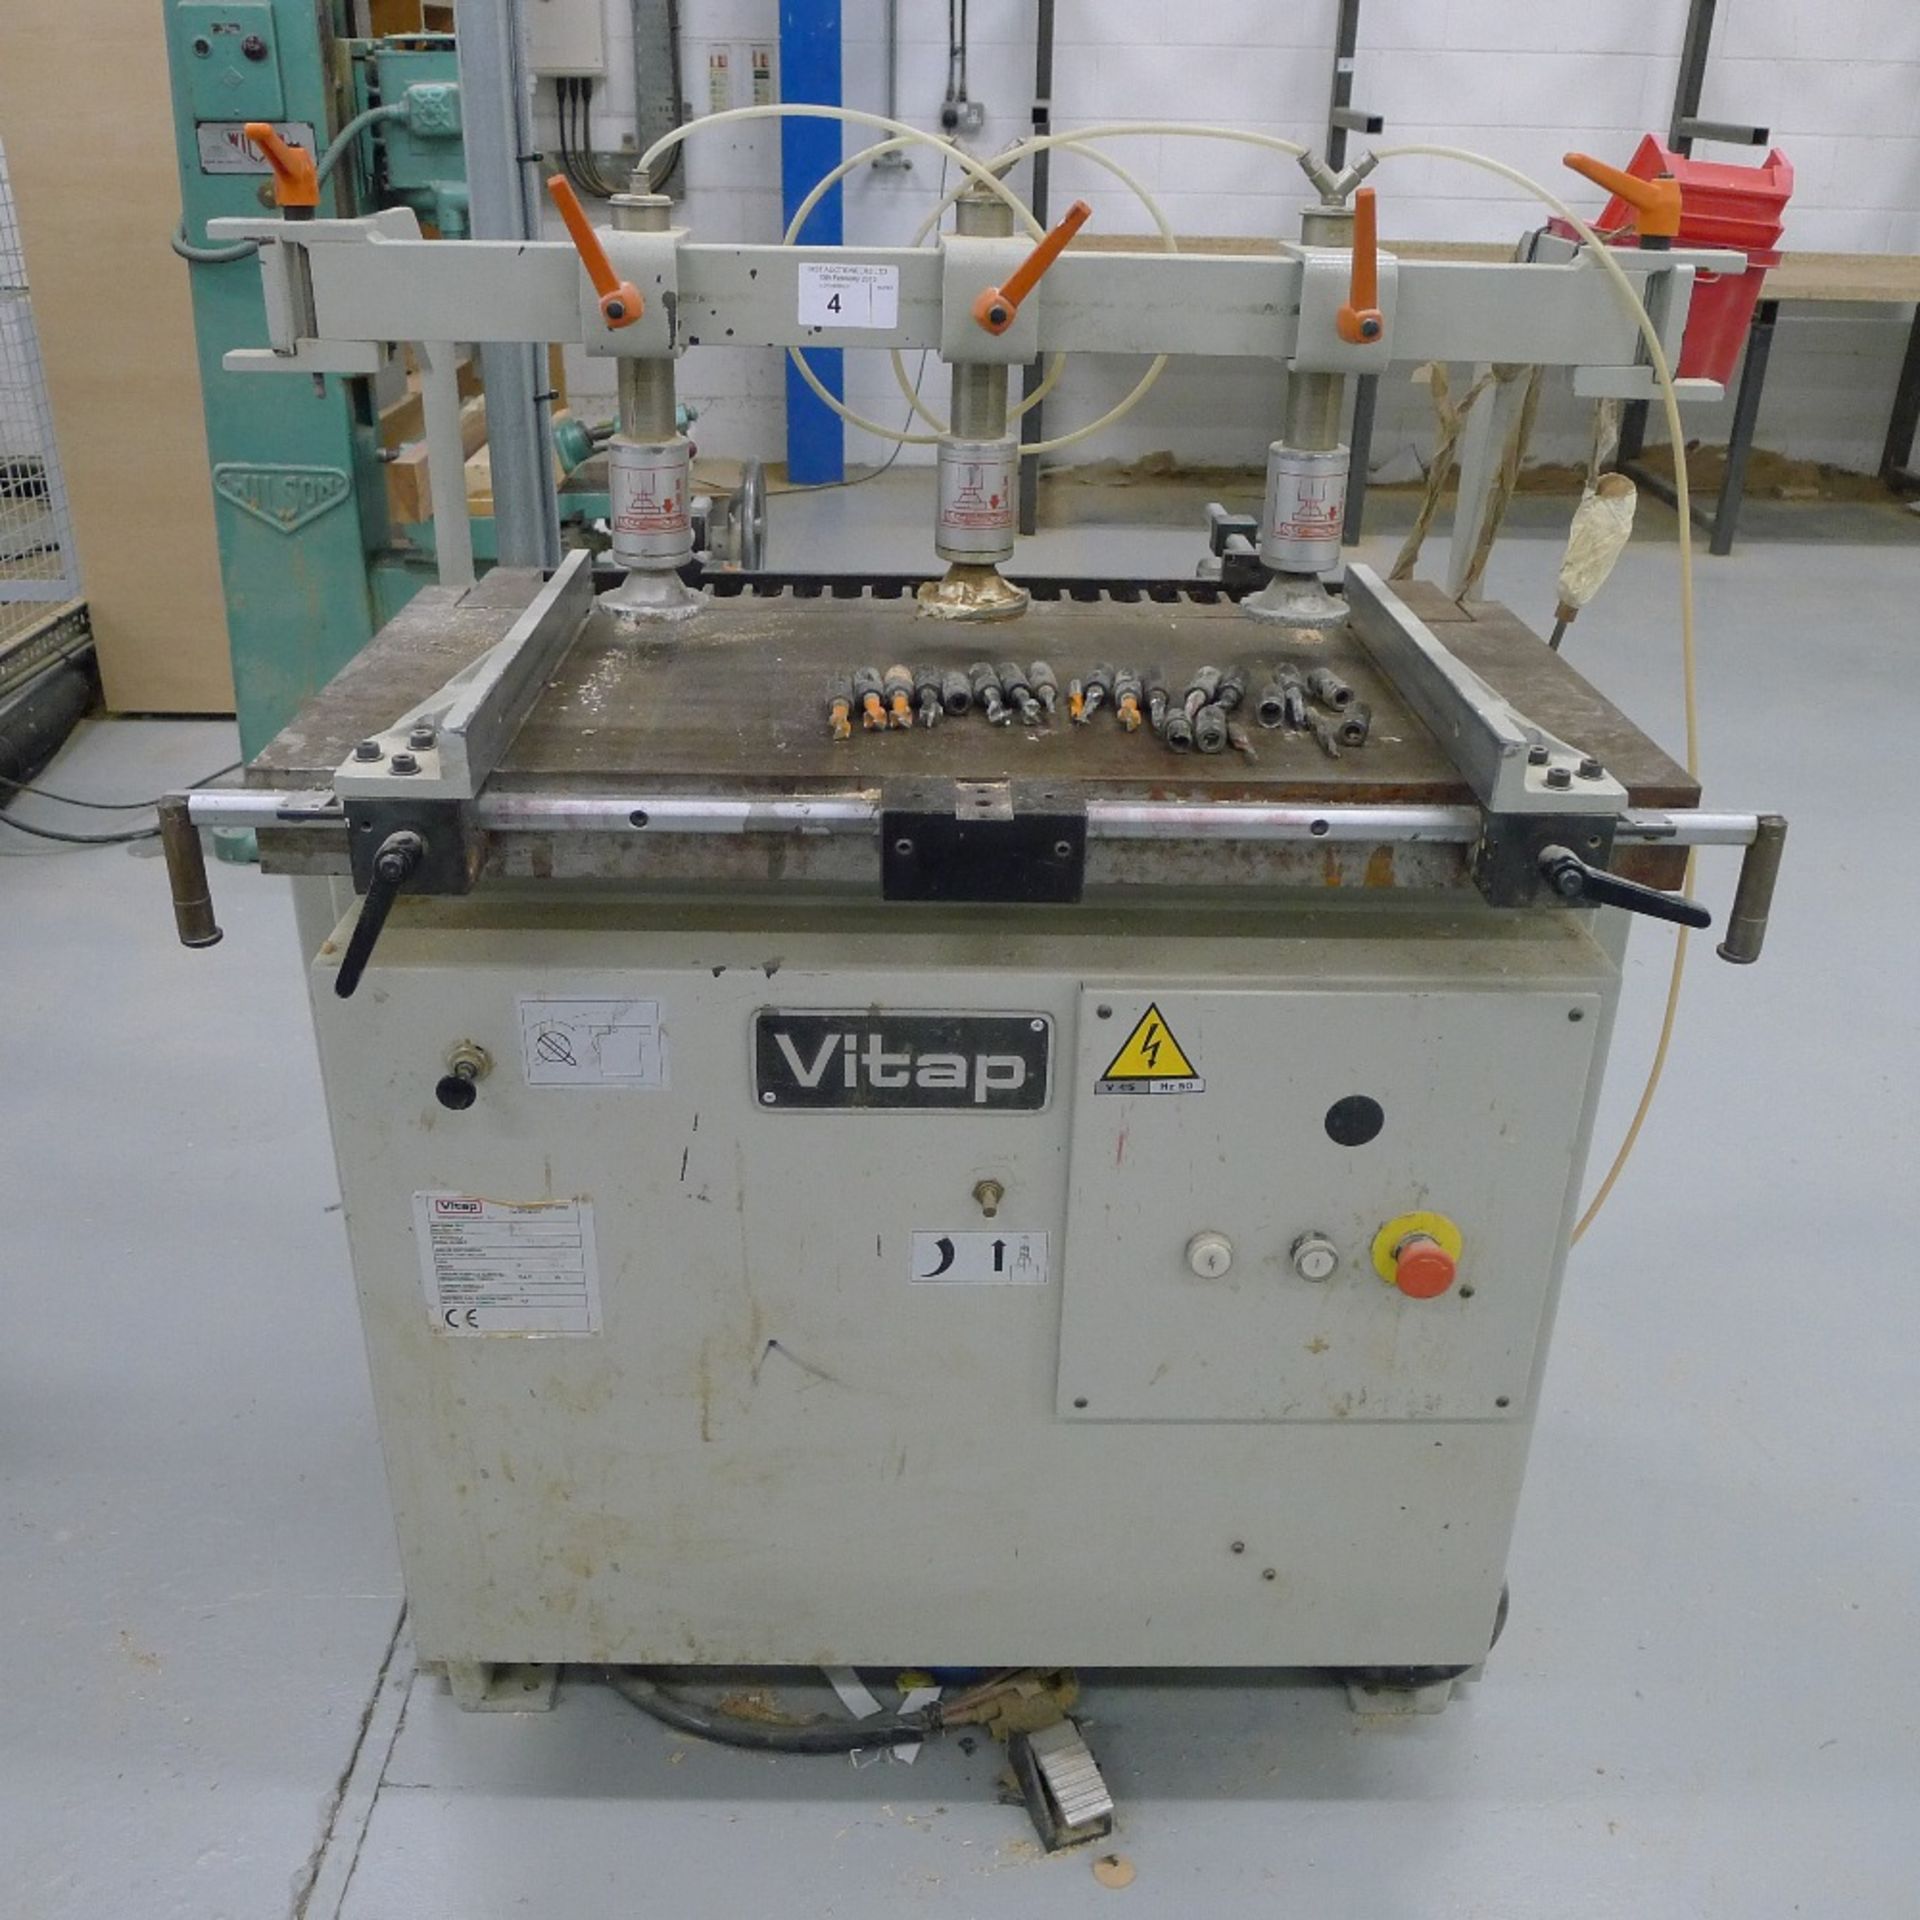 1 drilling and boring machine by Vitap type Alfa 21, s/n 791072, YOM 1998, 3ph, fitted with